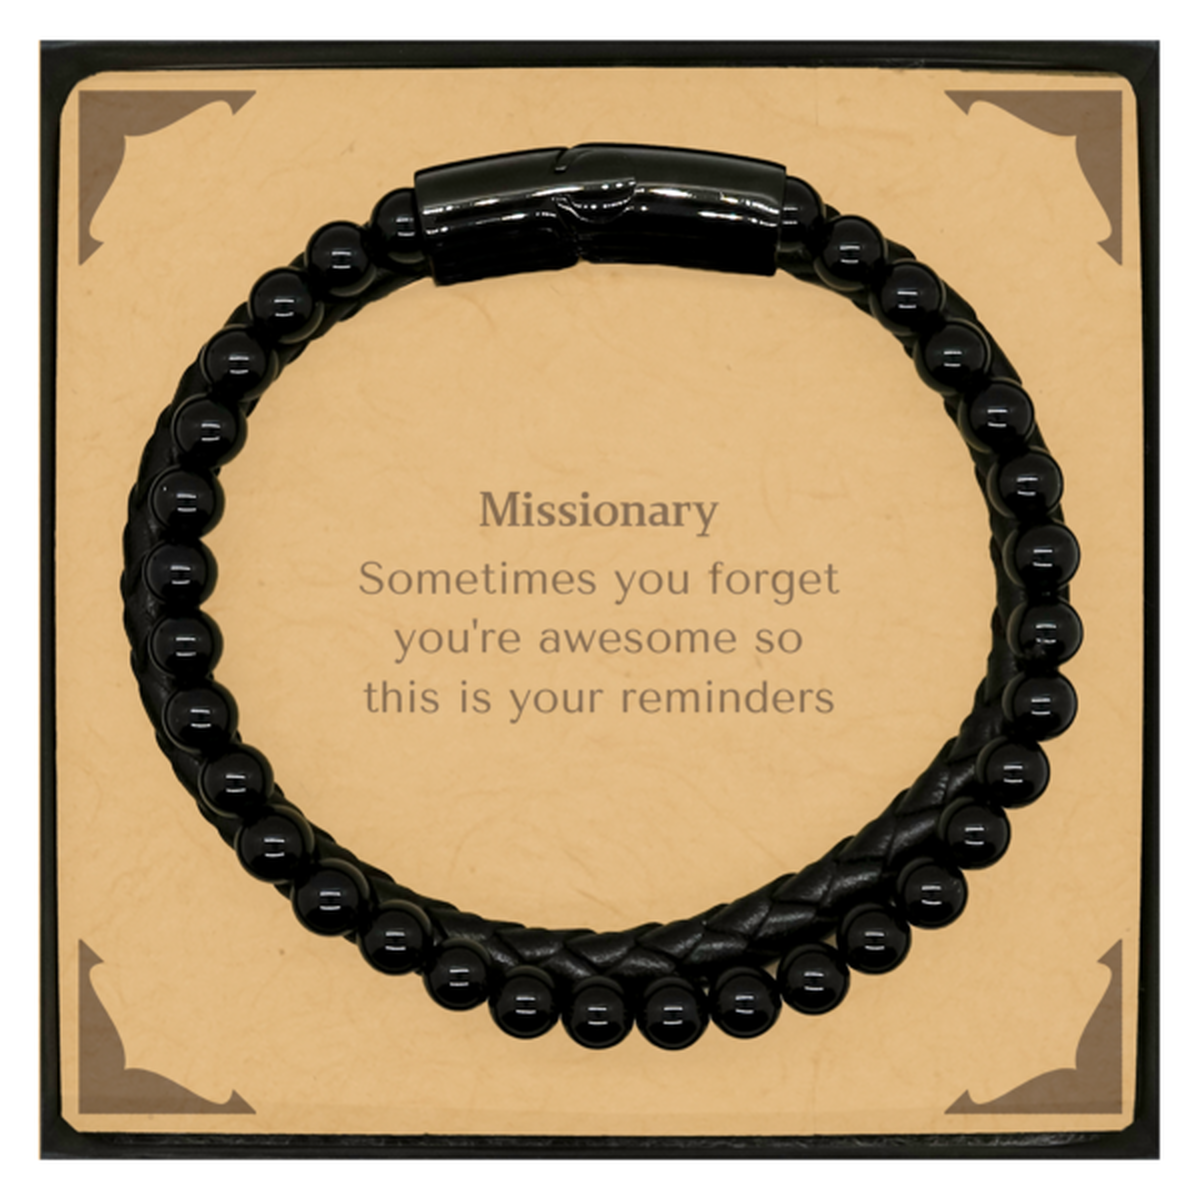 Sentimental Missionary Stone Leather Bracelets, Missionary Sometimes you forget you're awesome so this is your reminders, Graduation Christmas Birthday Gifts for Missionary, Men, Women, Coworkers